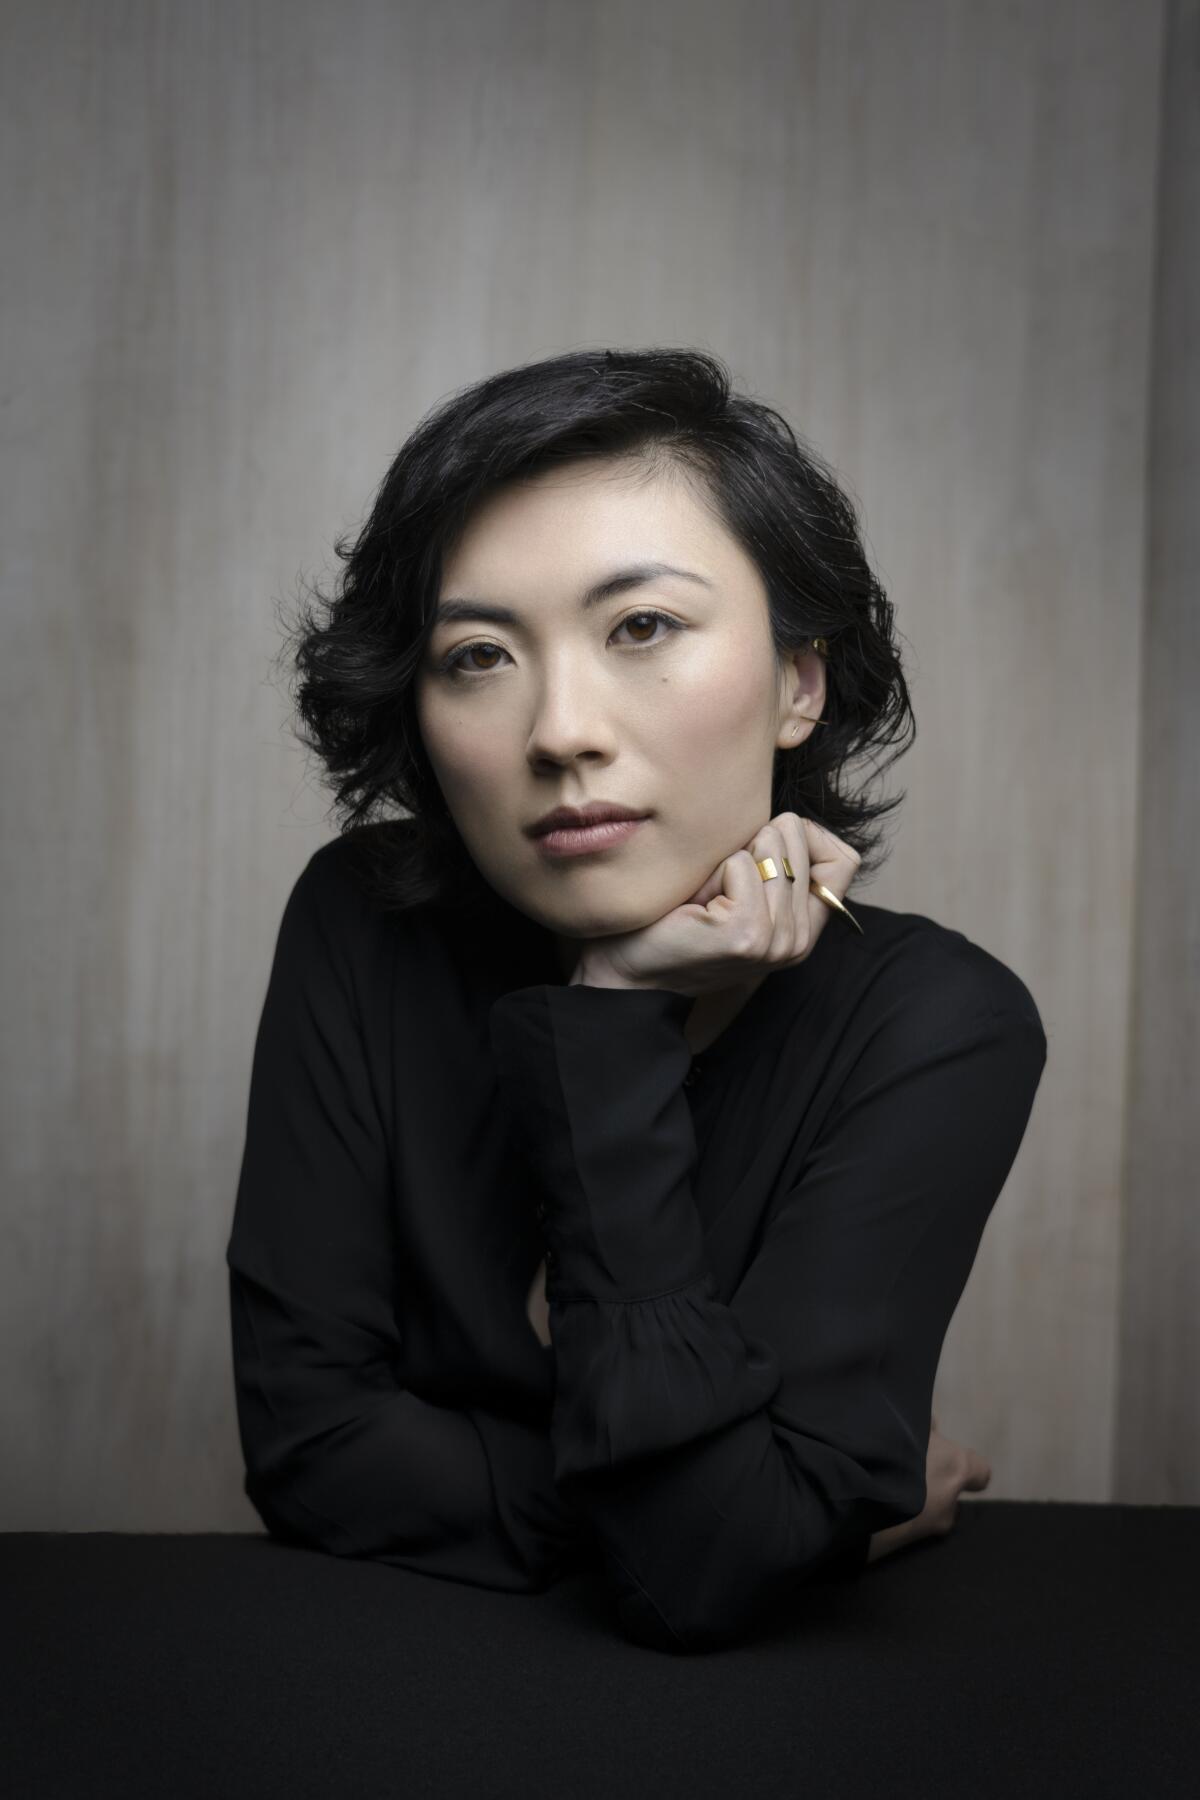 A woman with chin length hair poses in a thin black sweater.